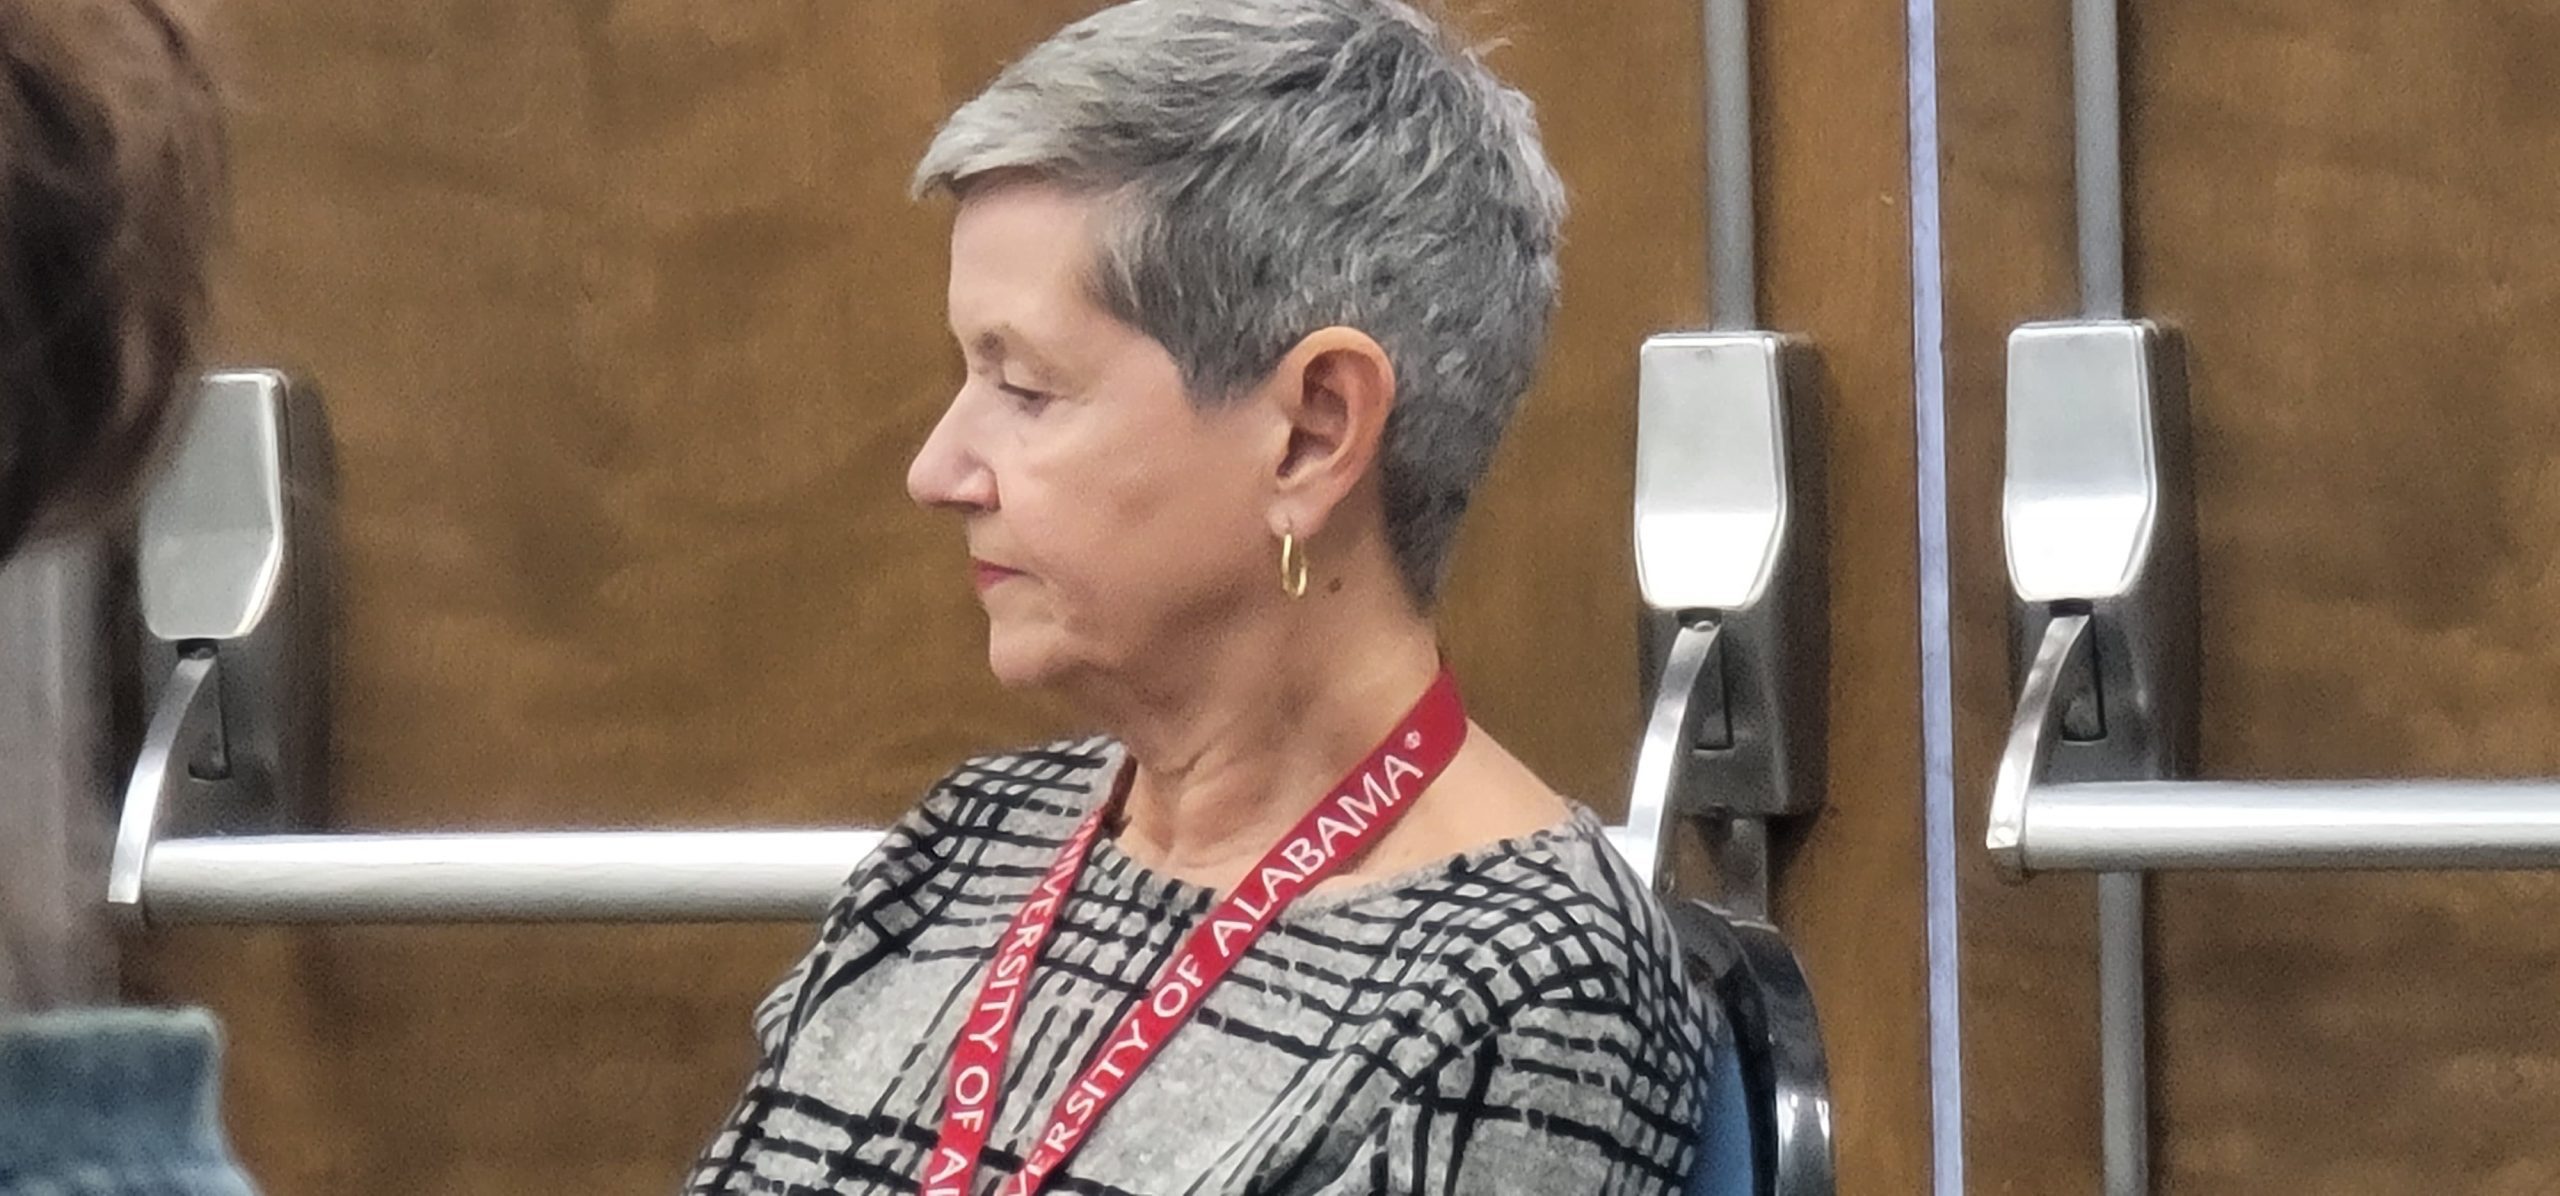 After more than 3 decades, Trussville City Clerk is leaving